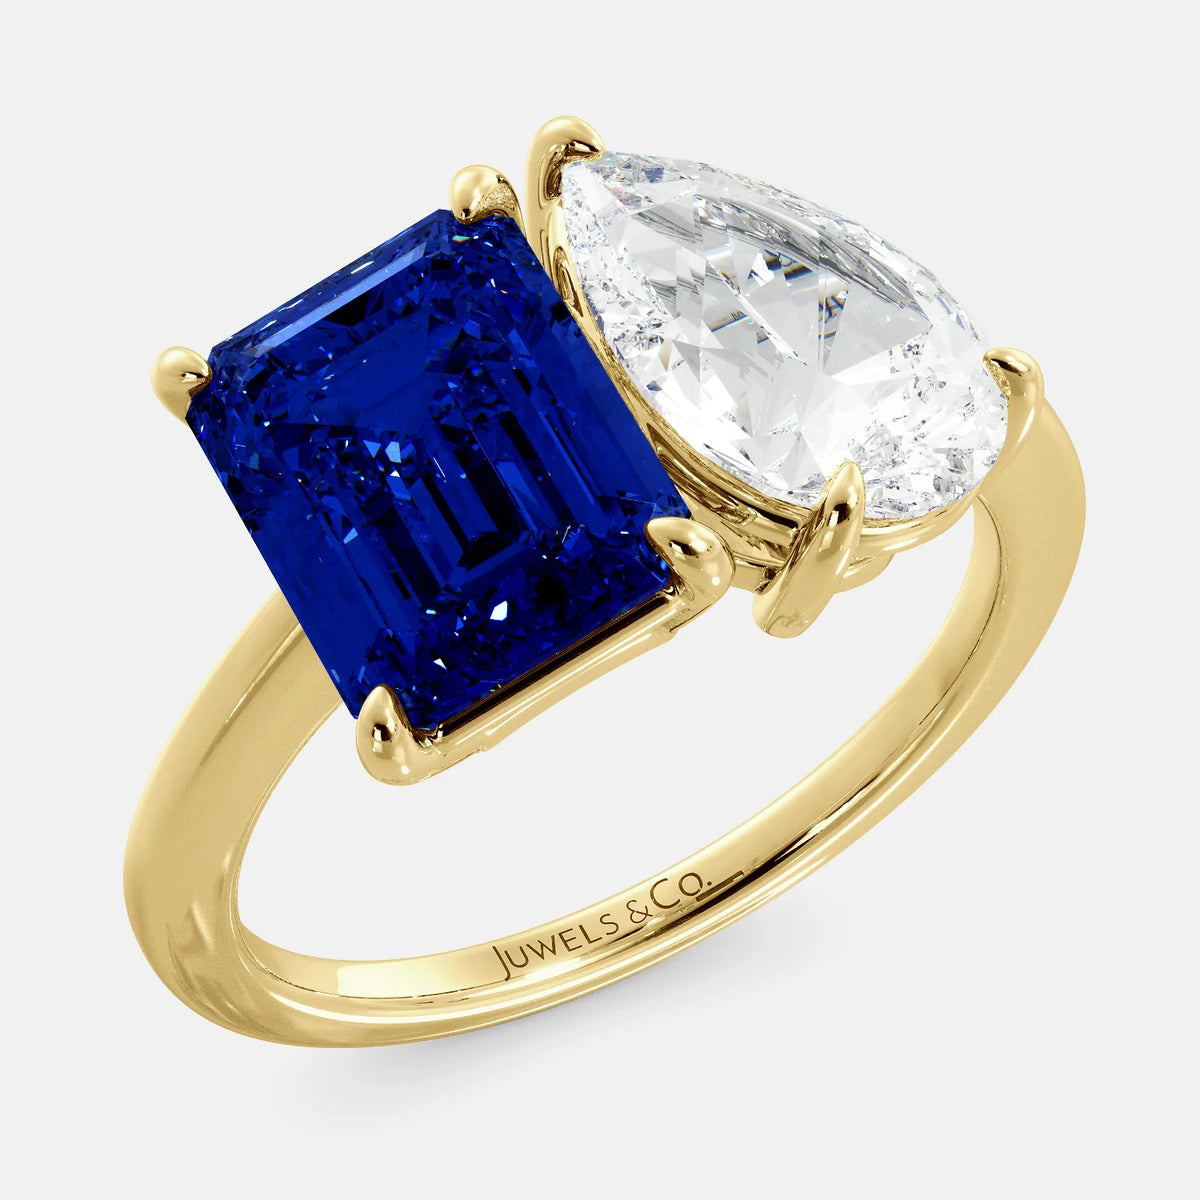 This image shows a toi et moi ring with a pear-shaped white topaz and an emerald-cut blue sapphire. The ring is set in a 14k yellow gold band and is available in all sizes. The blue sapphire is a precious gemstone that is said to promote loyalty, wisdom, and truth. The white topaz is a clear, colorless stone that is said to promote creativity, imagination, and self-expression. The toi et moi ring is a beautiful and unique way to show your love and commitment to someone special.